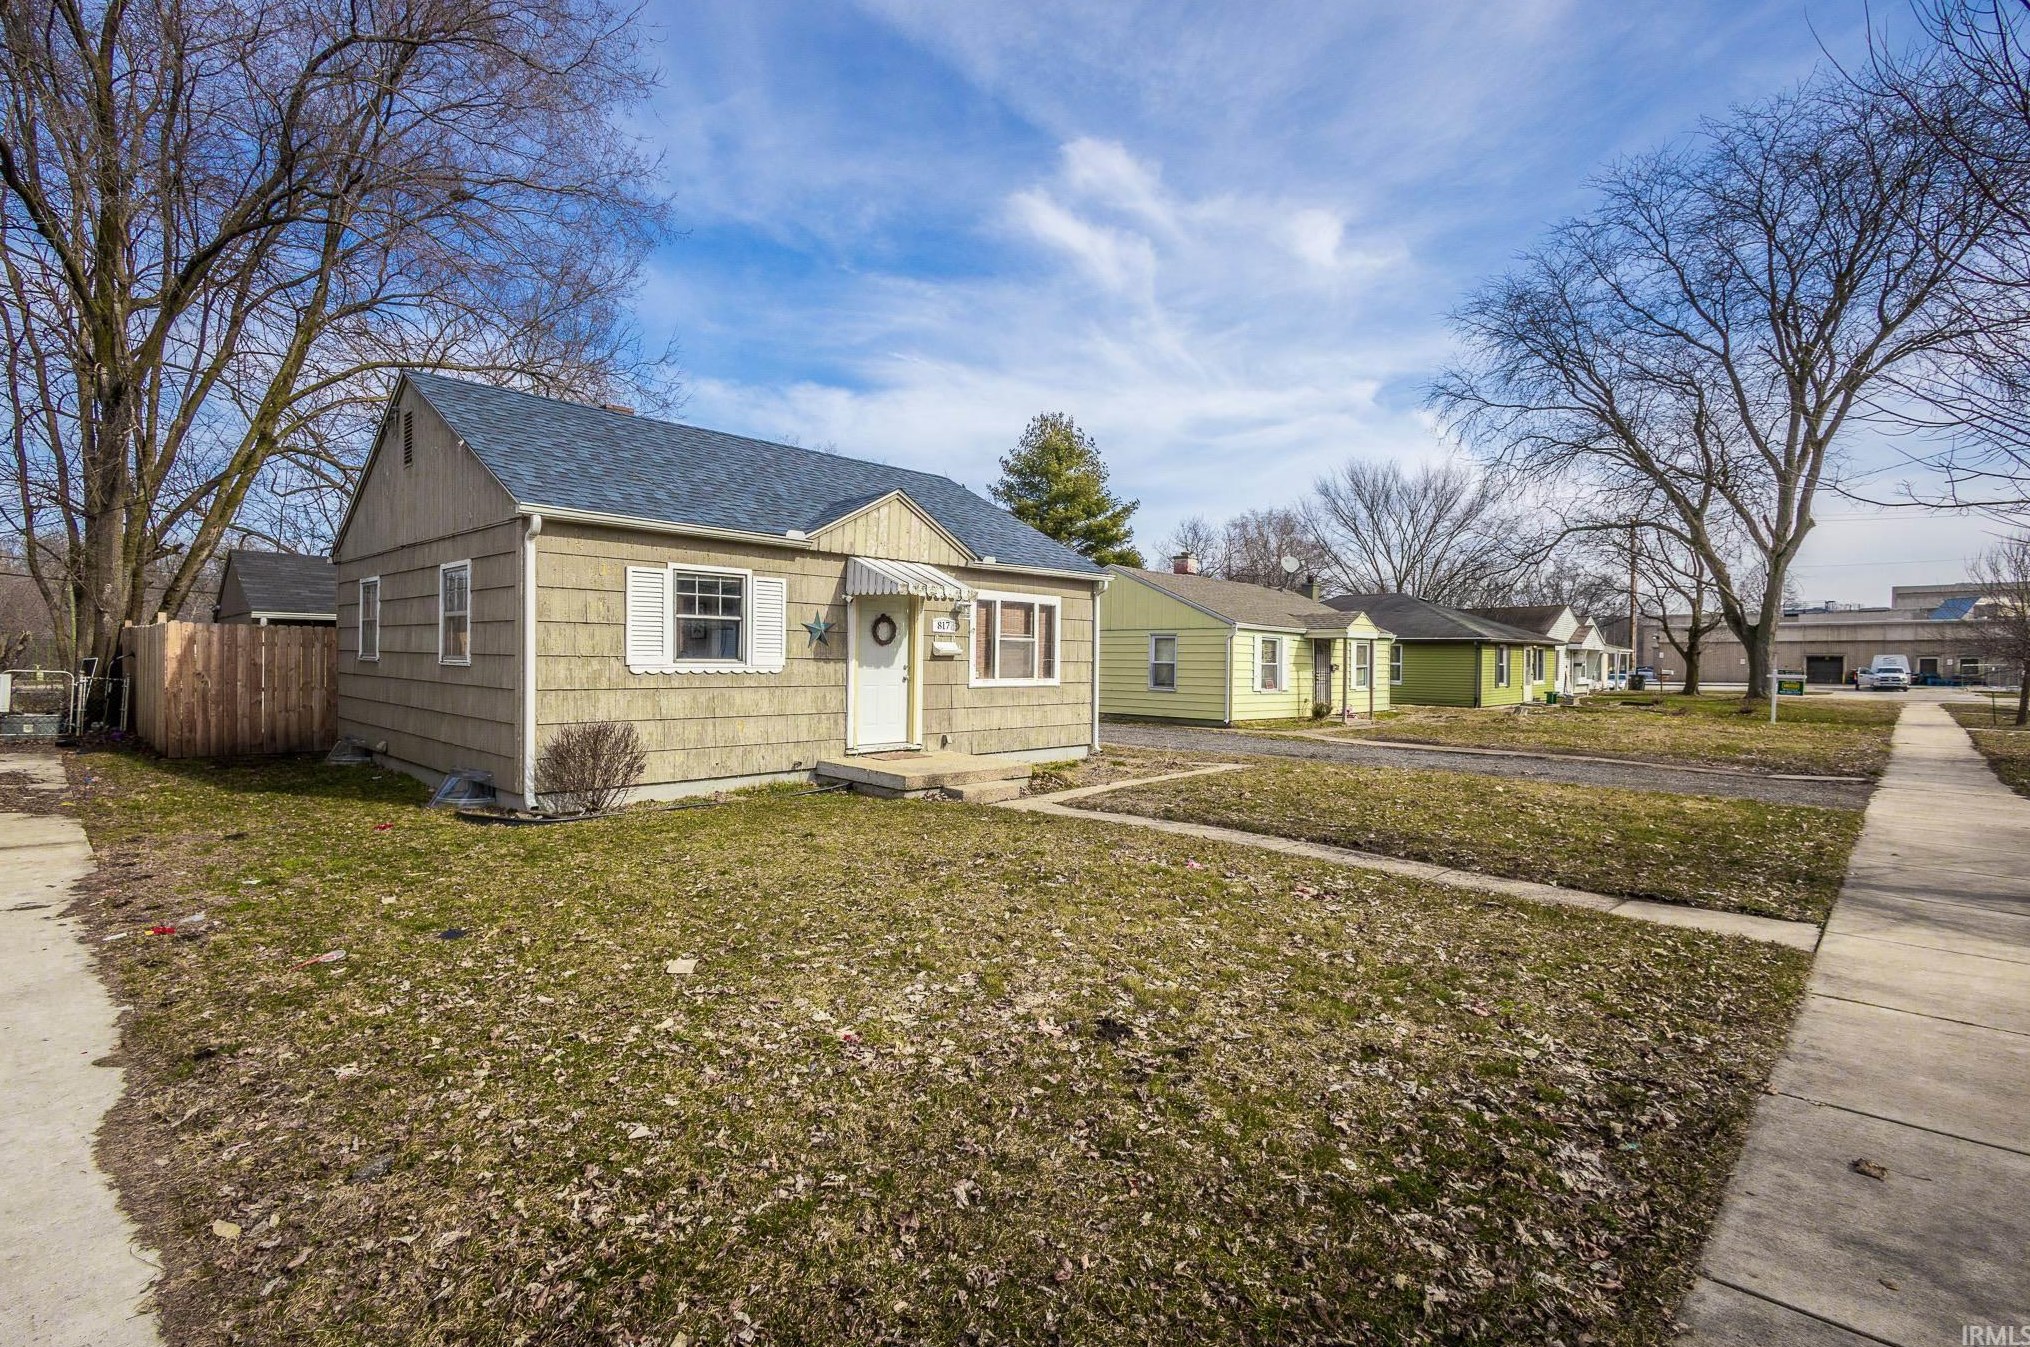 817 Bryan St, South Bend, IN 46616-1826